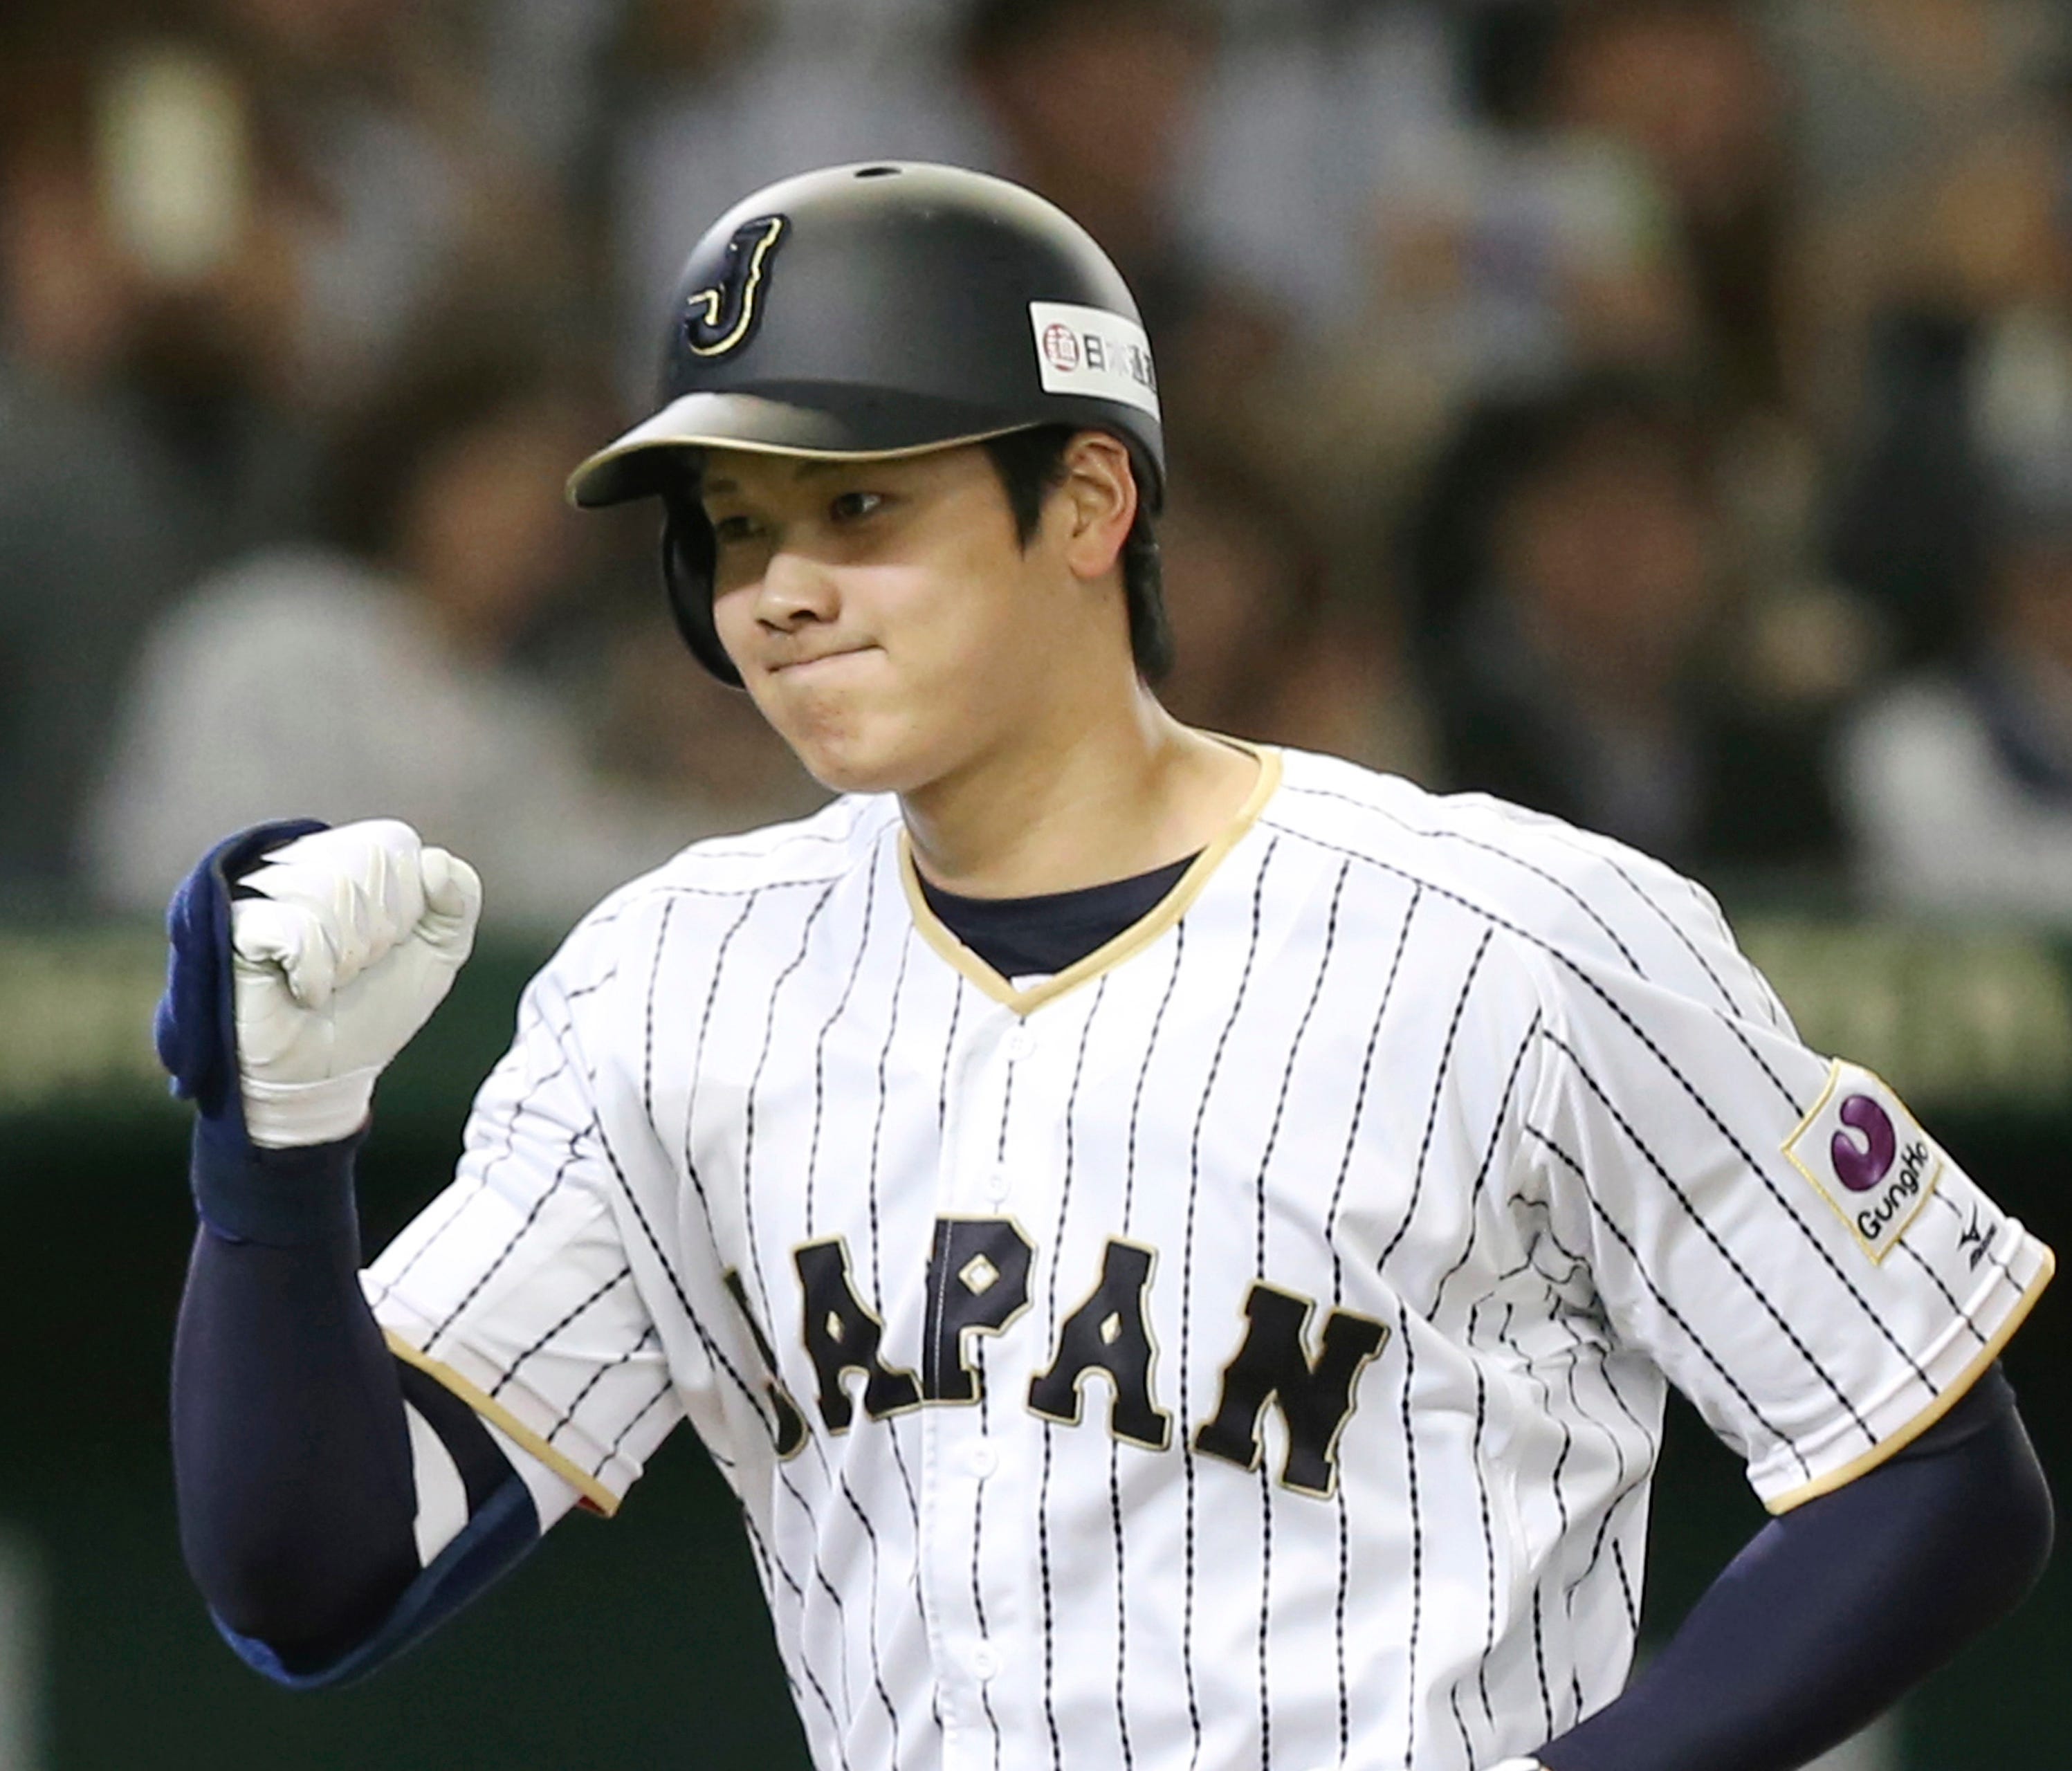 Shohei Ohtani would be limited to a minor league contract with a signing bonus under MLB's new collective bargaining agreement.